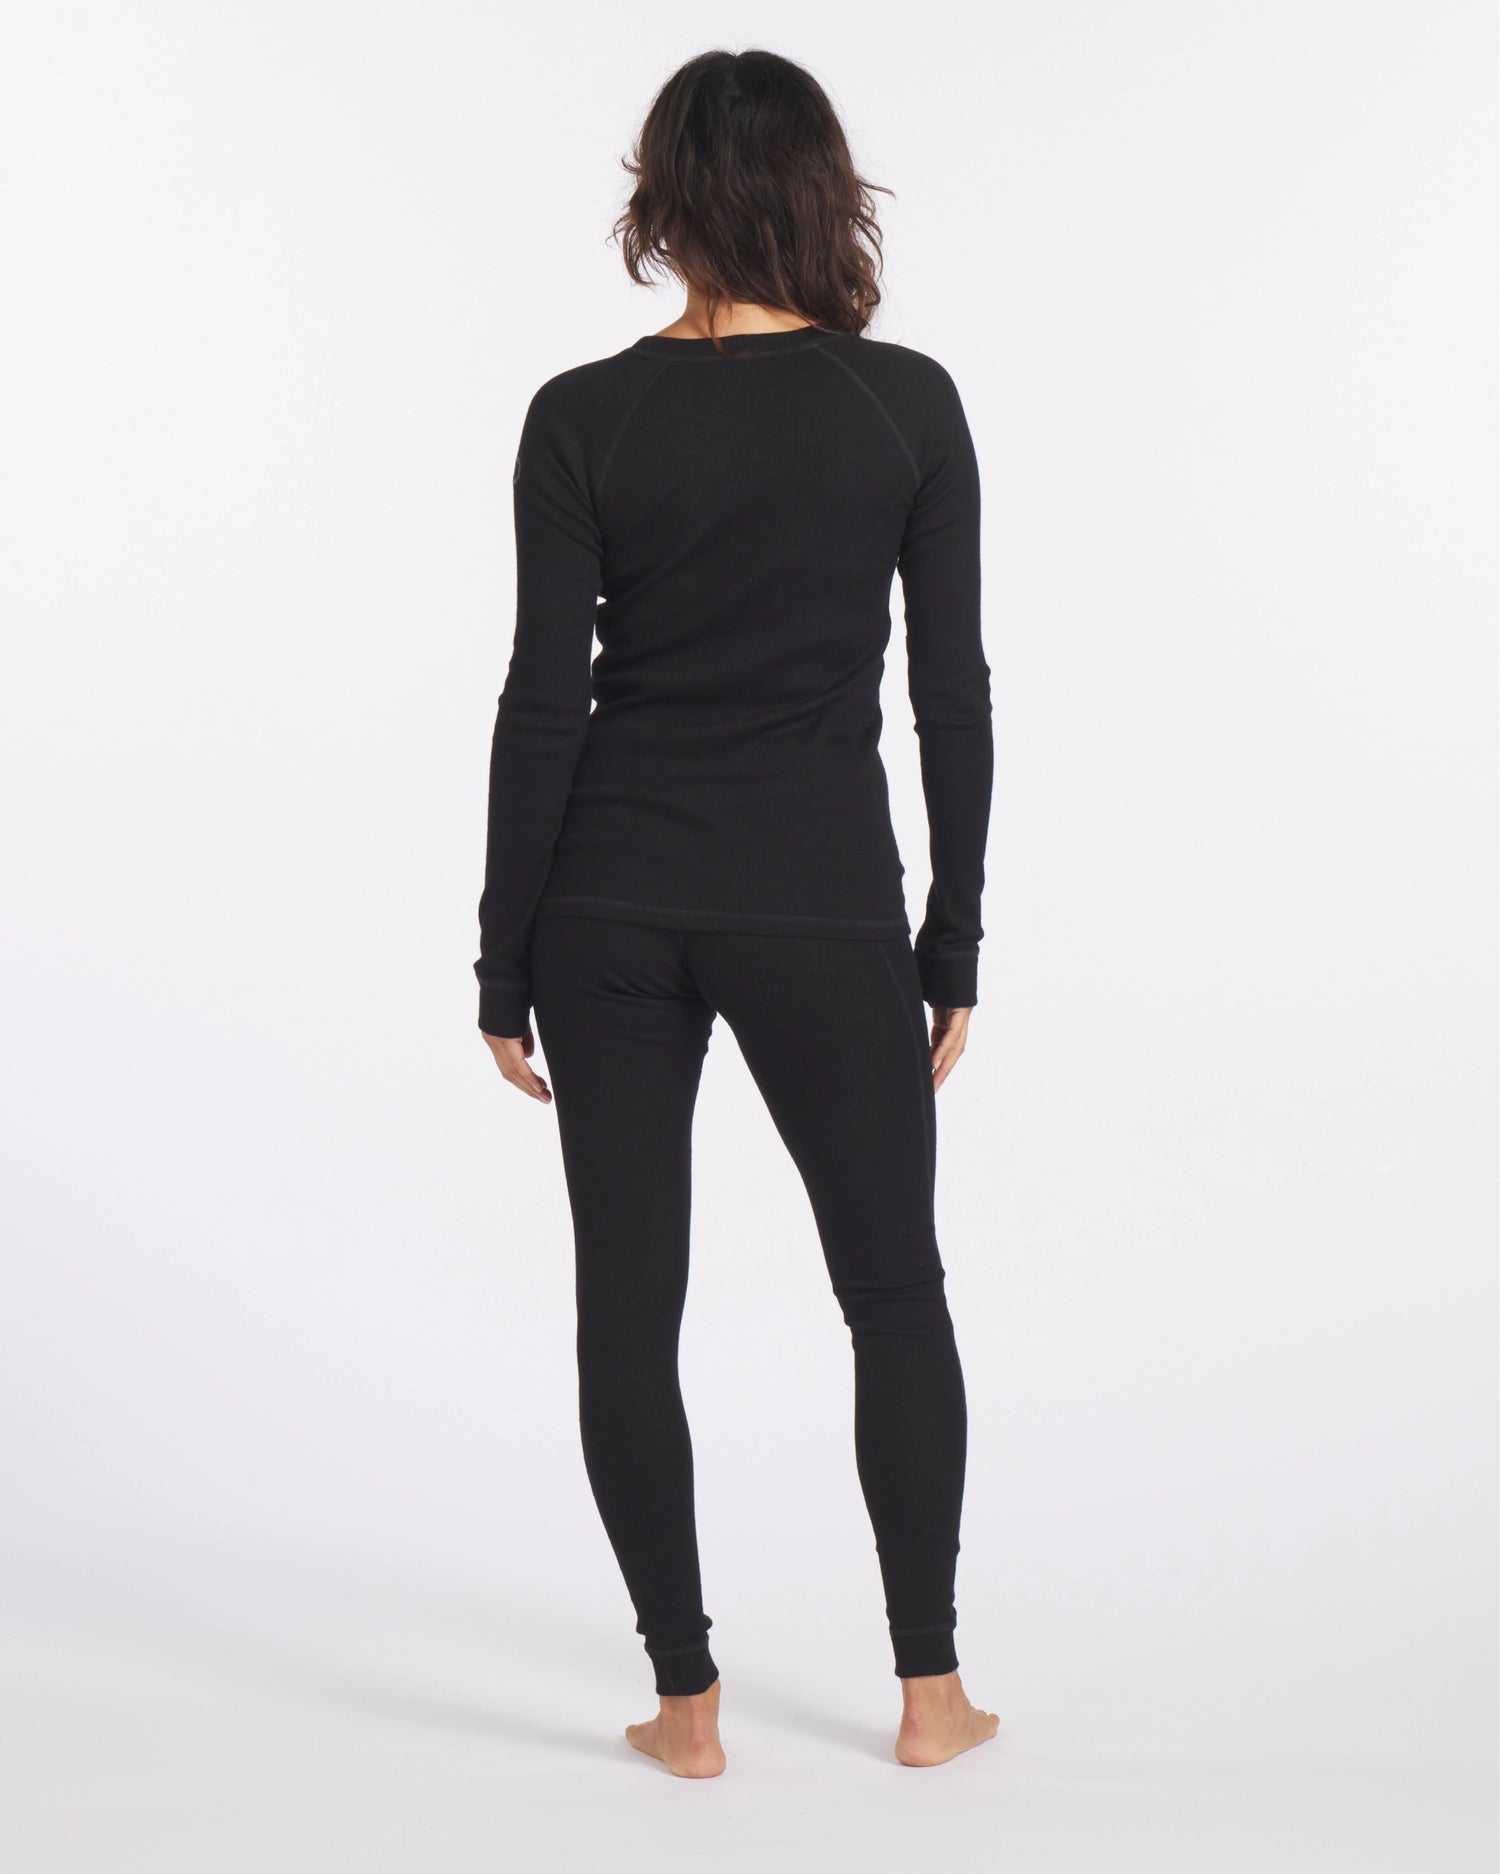 Women's thermals base layer bottoms